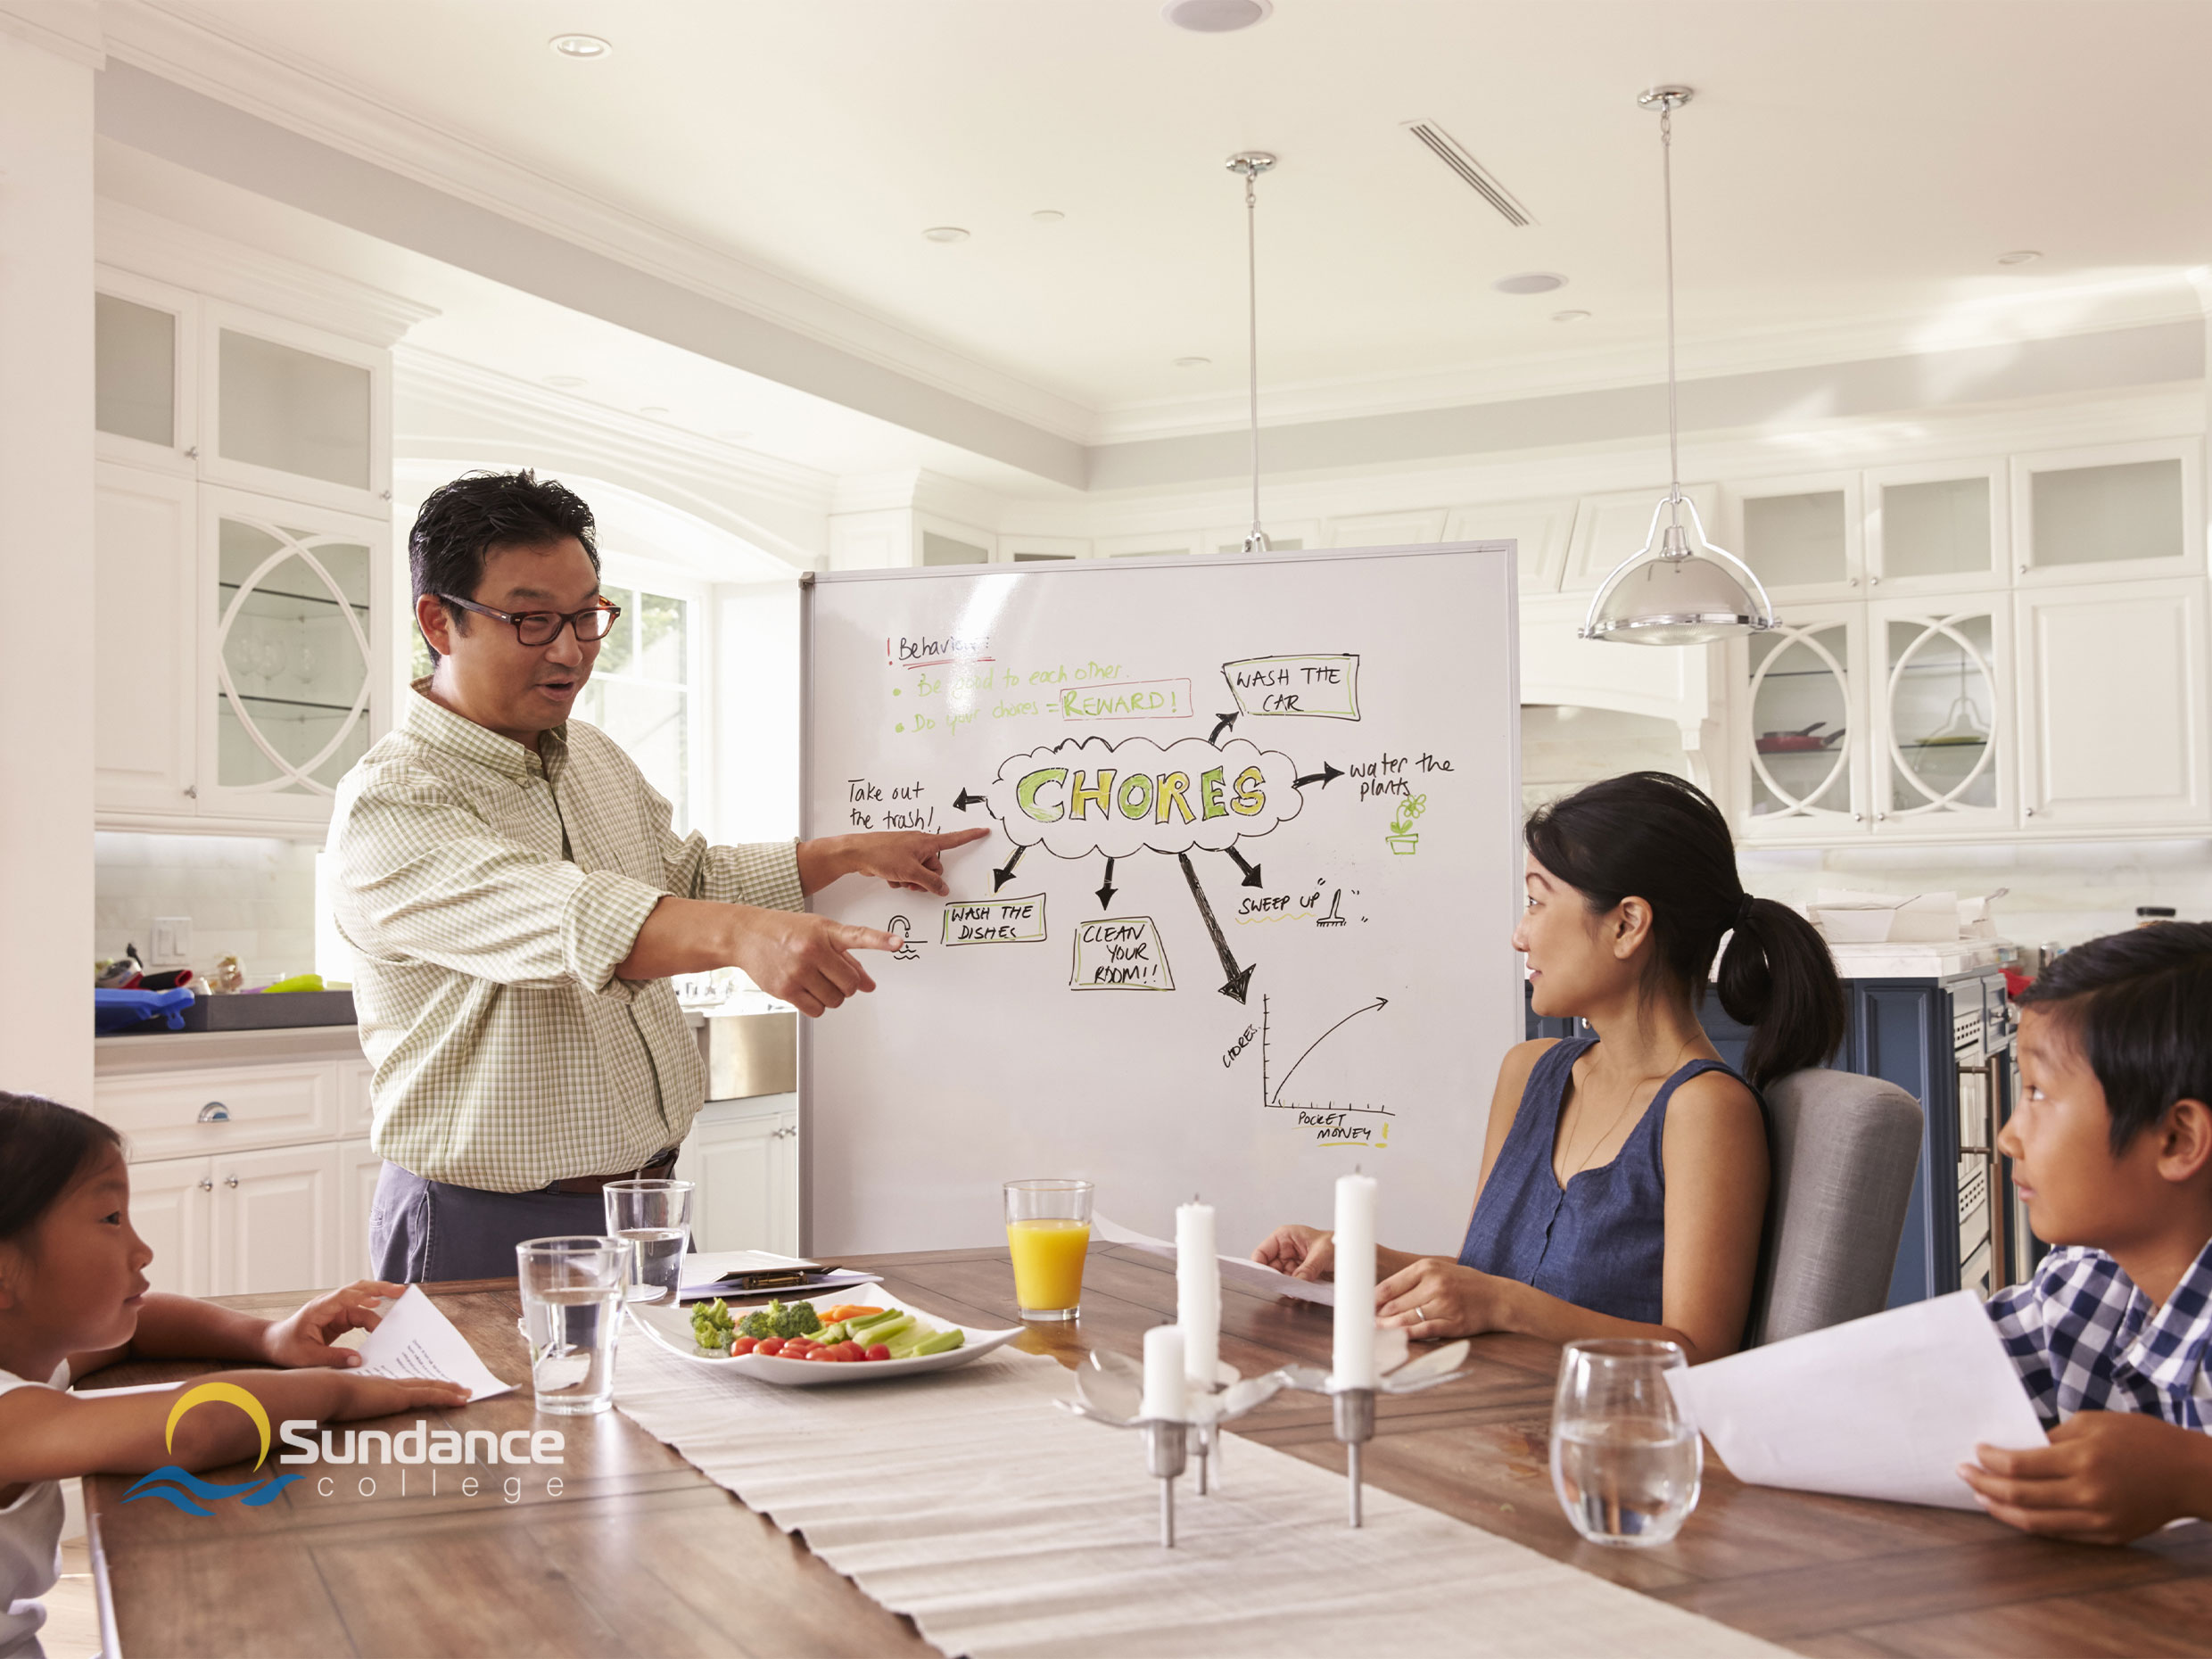 A family siiting in the kitchen table and planning theier family responsibilities including chores to help one of the parents smoothly start their educational journey at a career college.